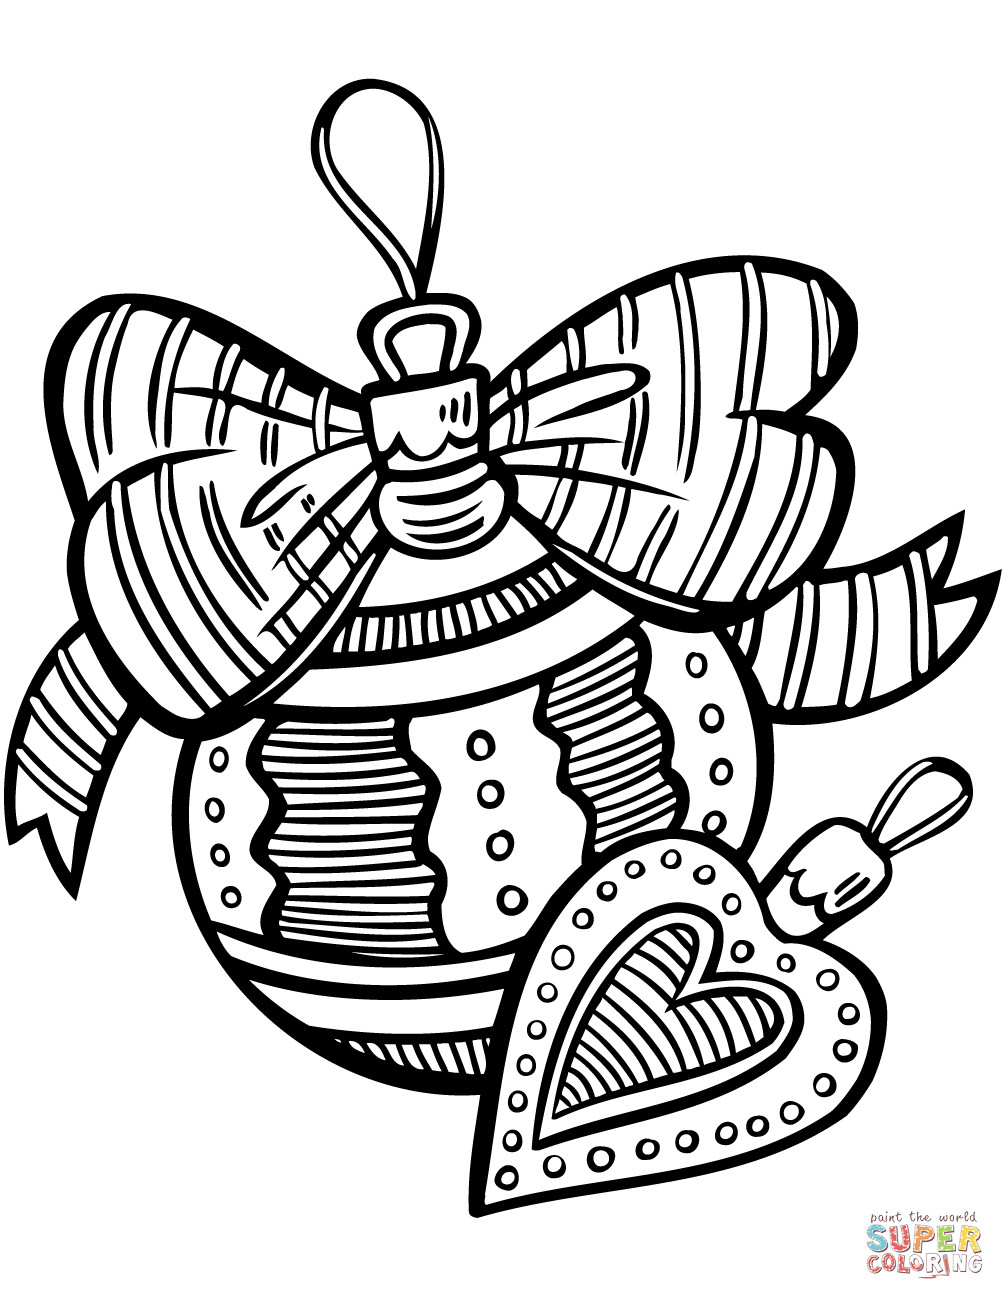 Christmas Ornaments Coloring Pages
 Christmas Ornaments coloring page